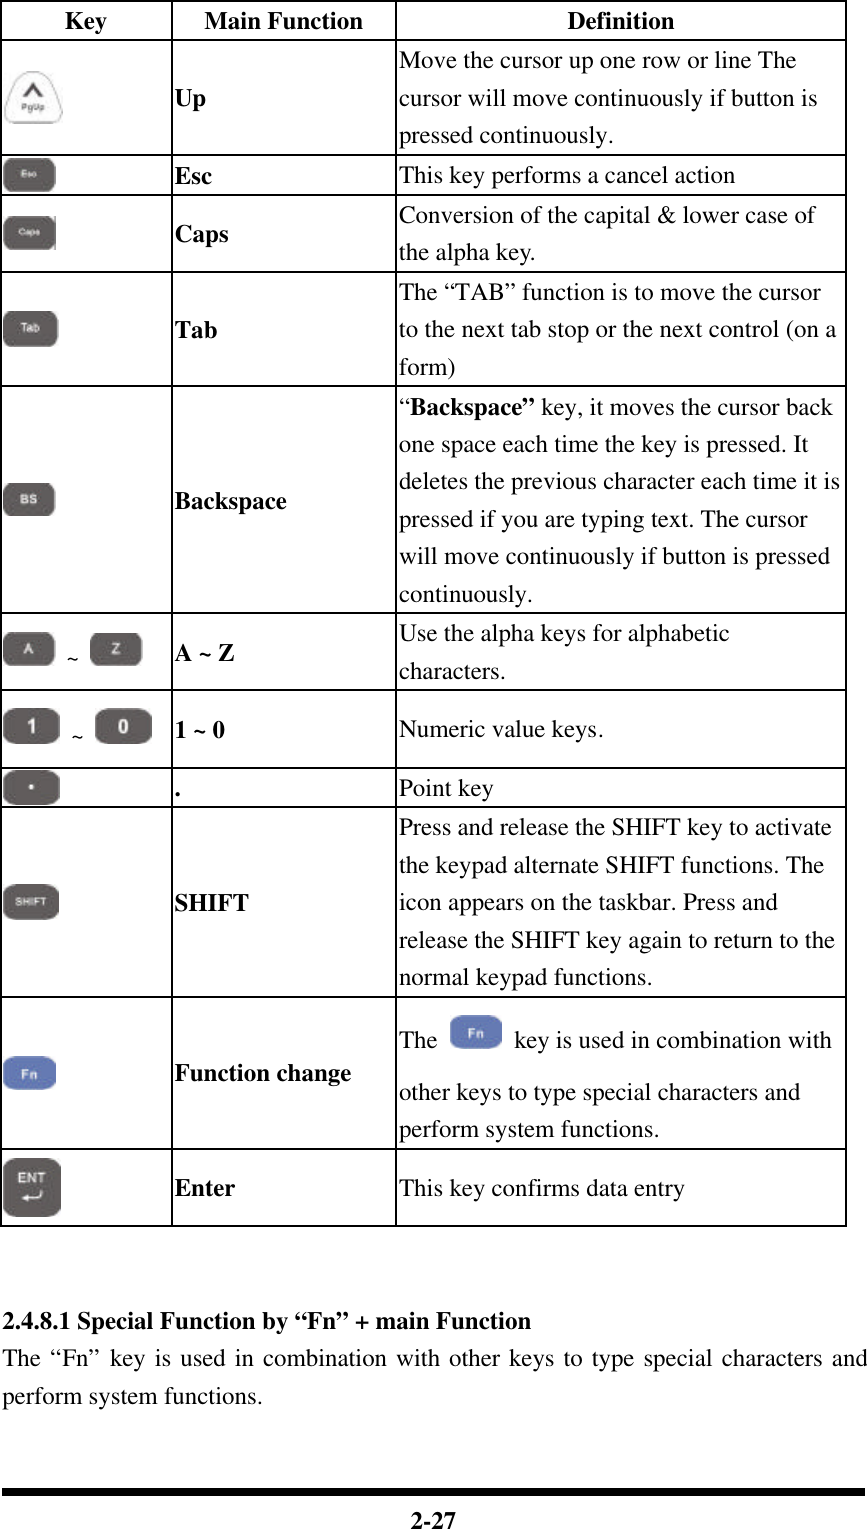  2-27 Key Main Function Definition  Up Move the cursor up one row or line The cursor will move continuously if button is pressed continuously.  Esc This key performs a cancel action  Caps Conversion of the capital &amp; lower case of the alpha key.  Tab The “TAB” function is to move the cursor to the next tab stop or the next control (on a form)  Backspace “Backspace” key, it moves the cursor back one space each time the key is pressed. It deletes the previous character each time it is pressed if you are typing text. The cursor will move continuously if button is pressed continuously.  ~    A ~ Z Use the alpha keys for alphabetic characters.  ~    1 ~ 0  Numeric value keys.  .  Point key  SHIFT Press and release the SHIFT key to activate the keypad alternate SHIFT functions. The icon appears on the taskbar. Press and release the SHIFT key again to return to the normal keypad functions.  Function change The   key is used in combination with other keys to type special characters and perform system functions.  Enter This key confirms data entry   2.4.8.1 Special Function by “Fn” + main Function The “Fn” key is used in combination with other keys to type special characters and perform system functions.  